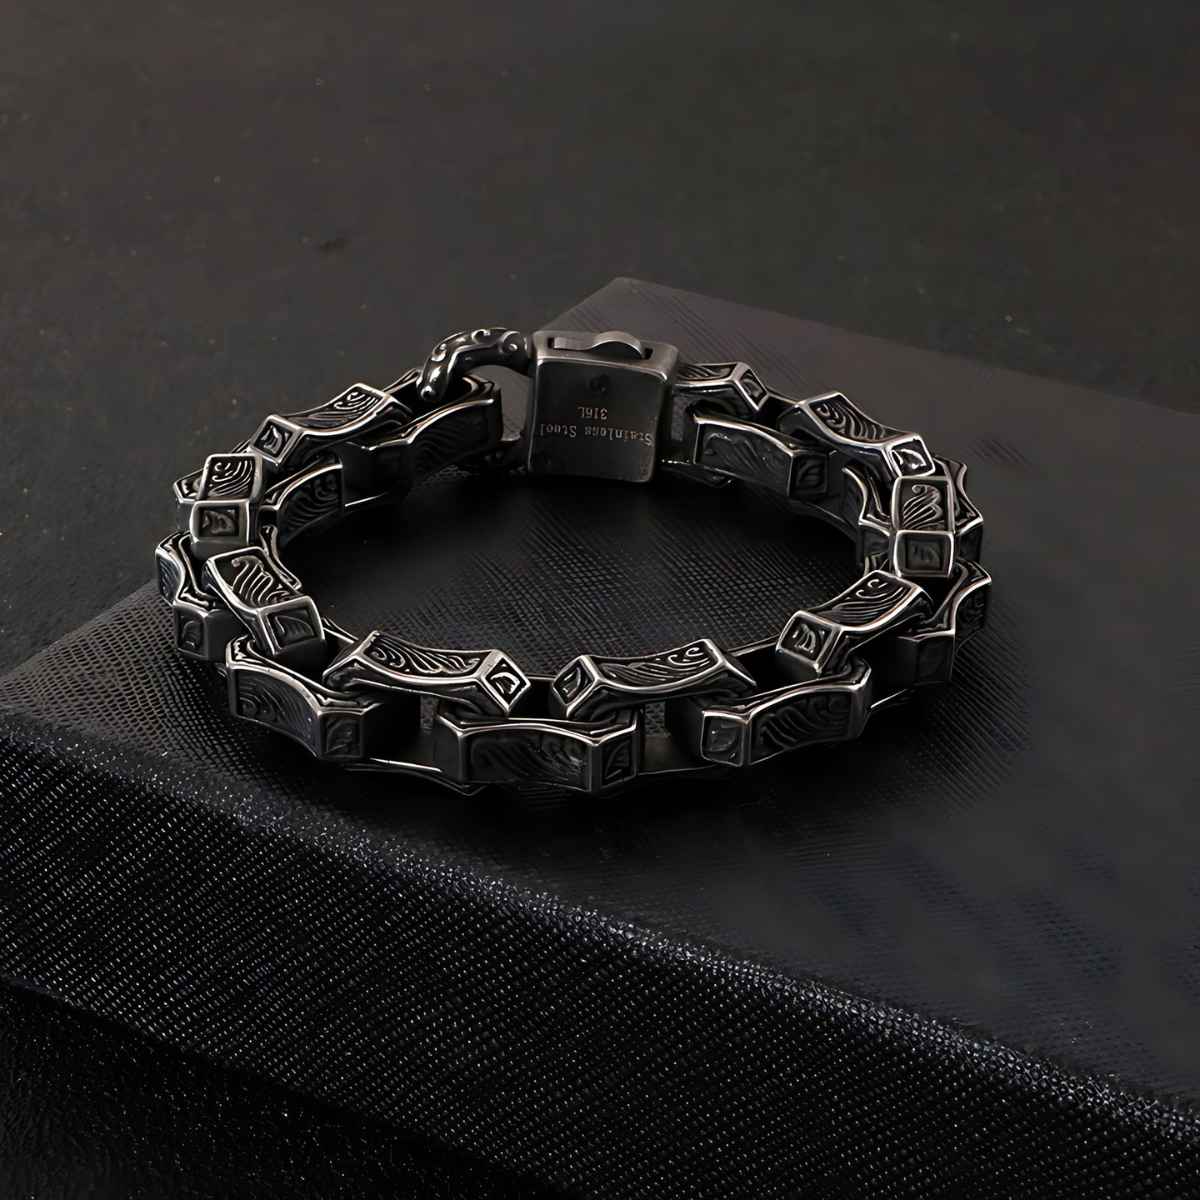 Mens Norse Chain Bracelet Xenos Jewelry